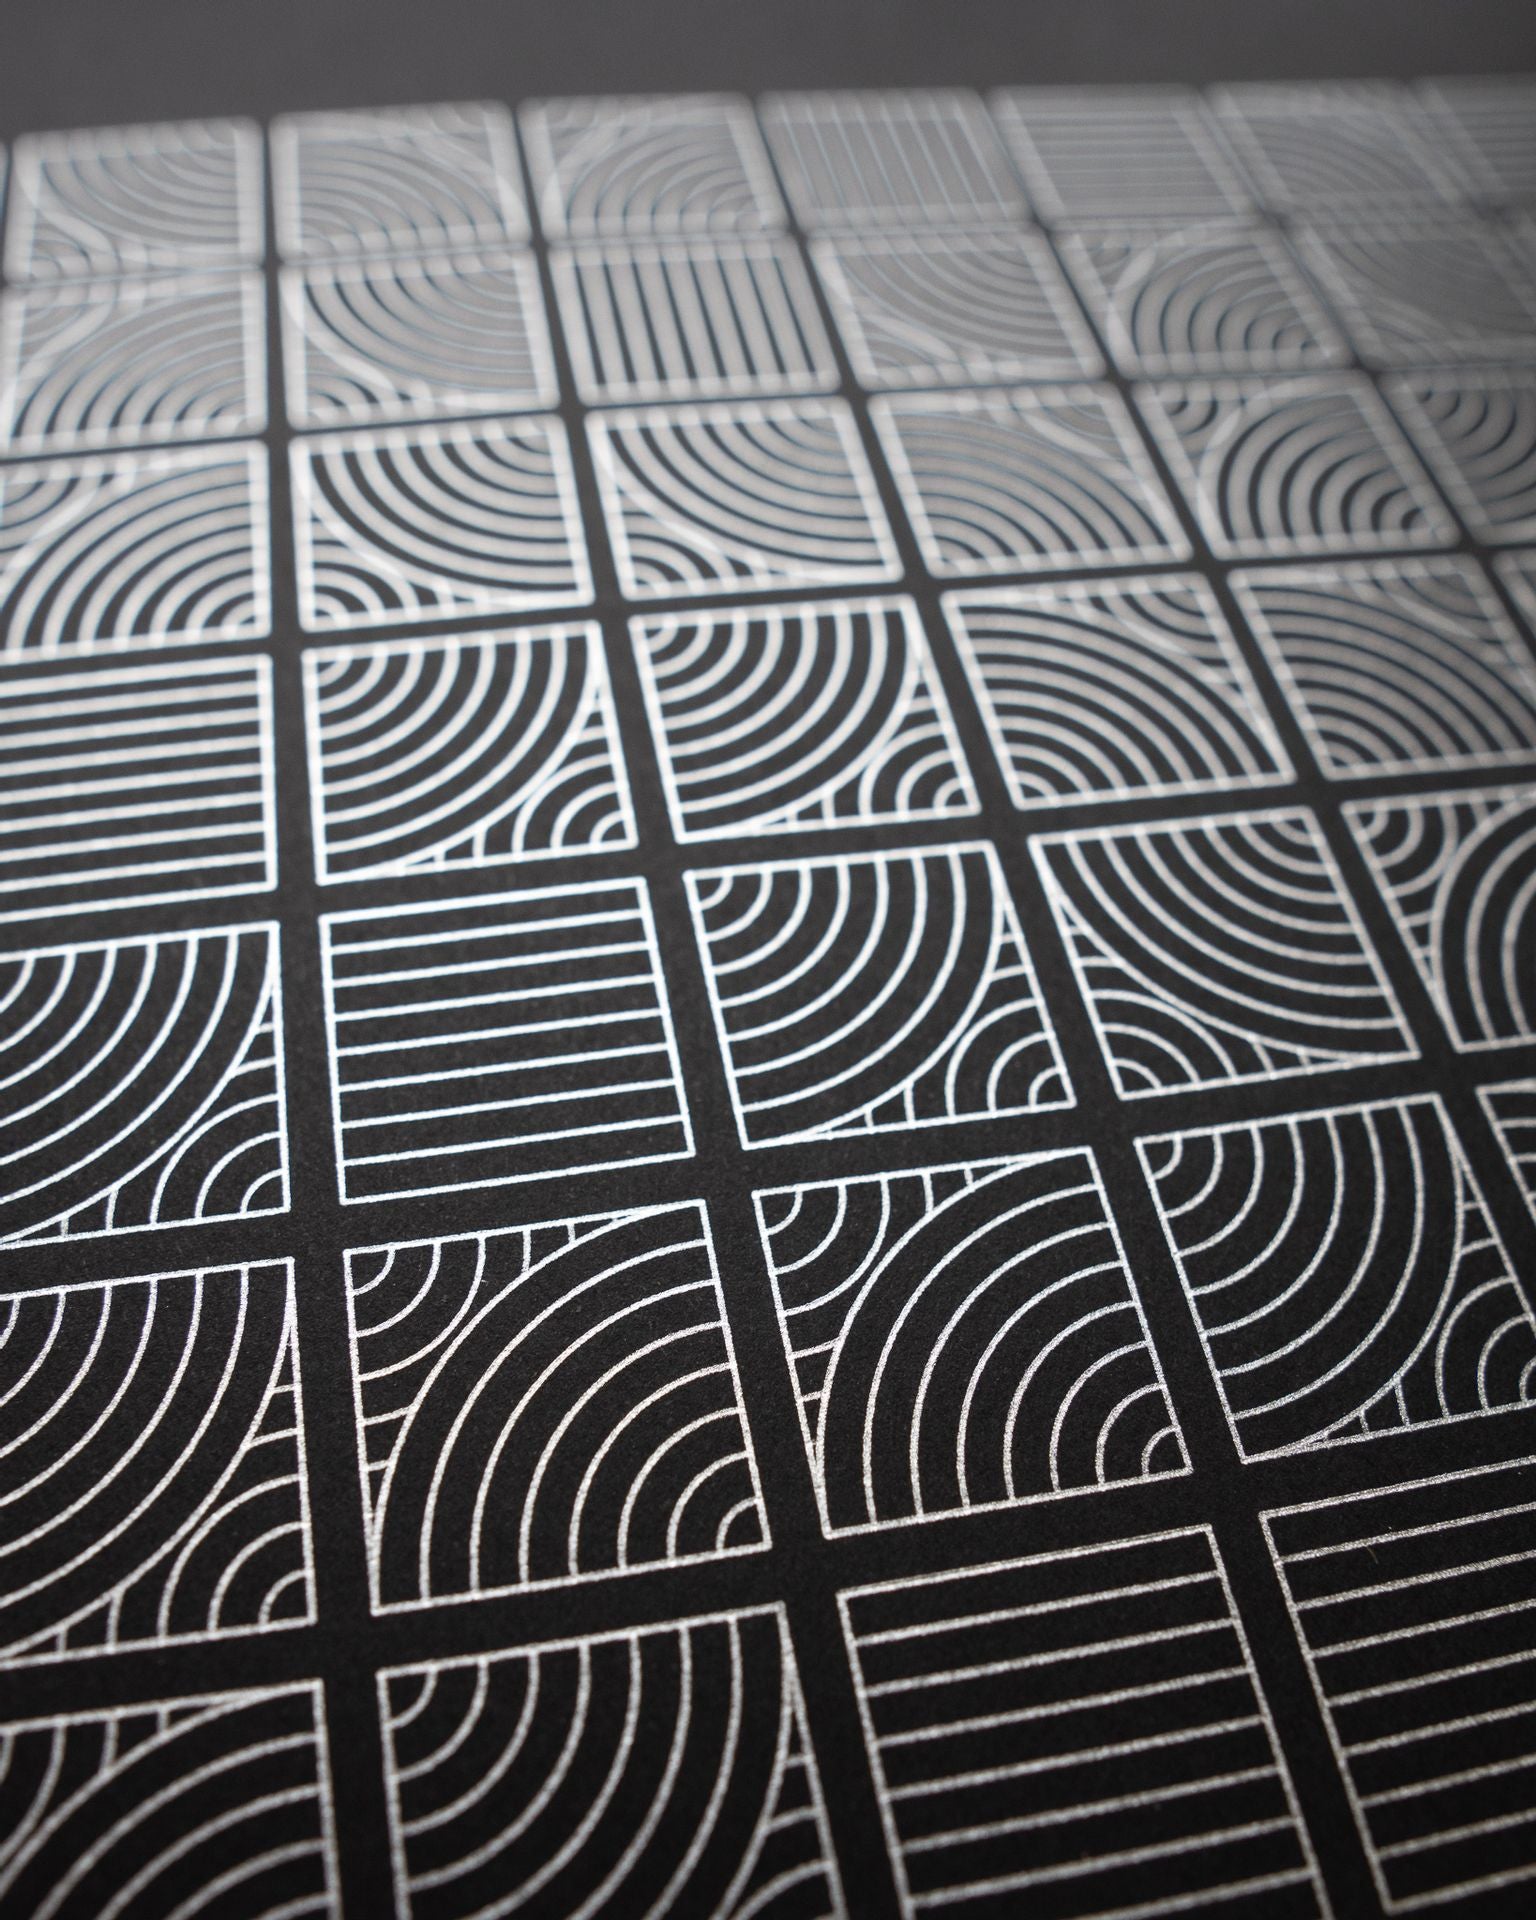 70s Pop Tiles, A3 64-up, silver on black